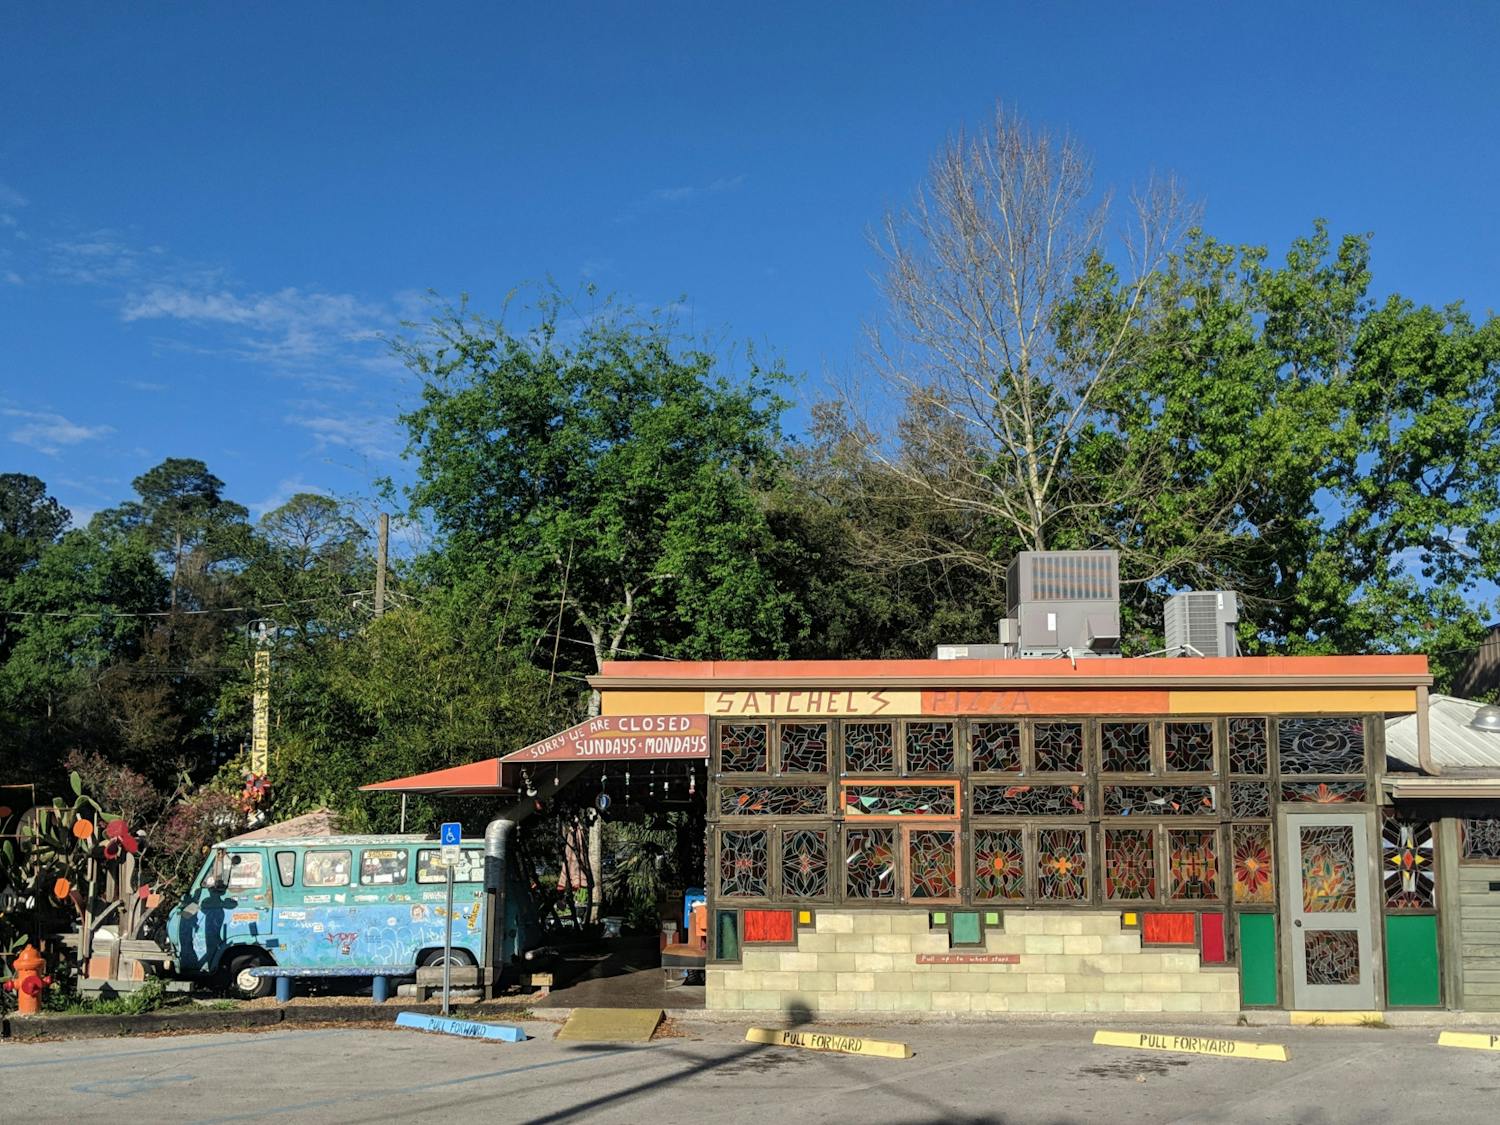 Satchel’s Pizza has been a staple in the Gainesville community since its opening in 2003.